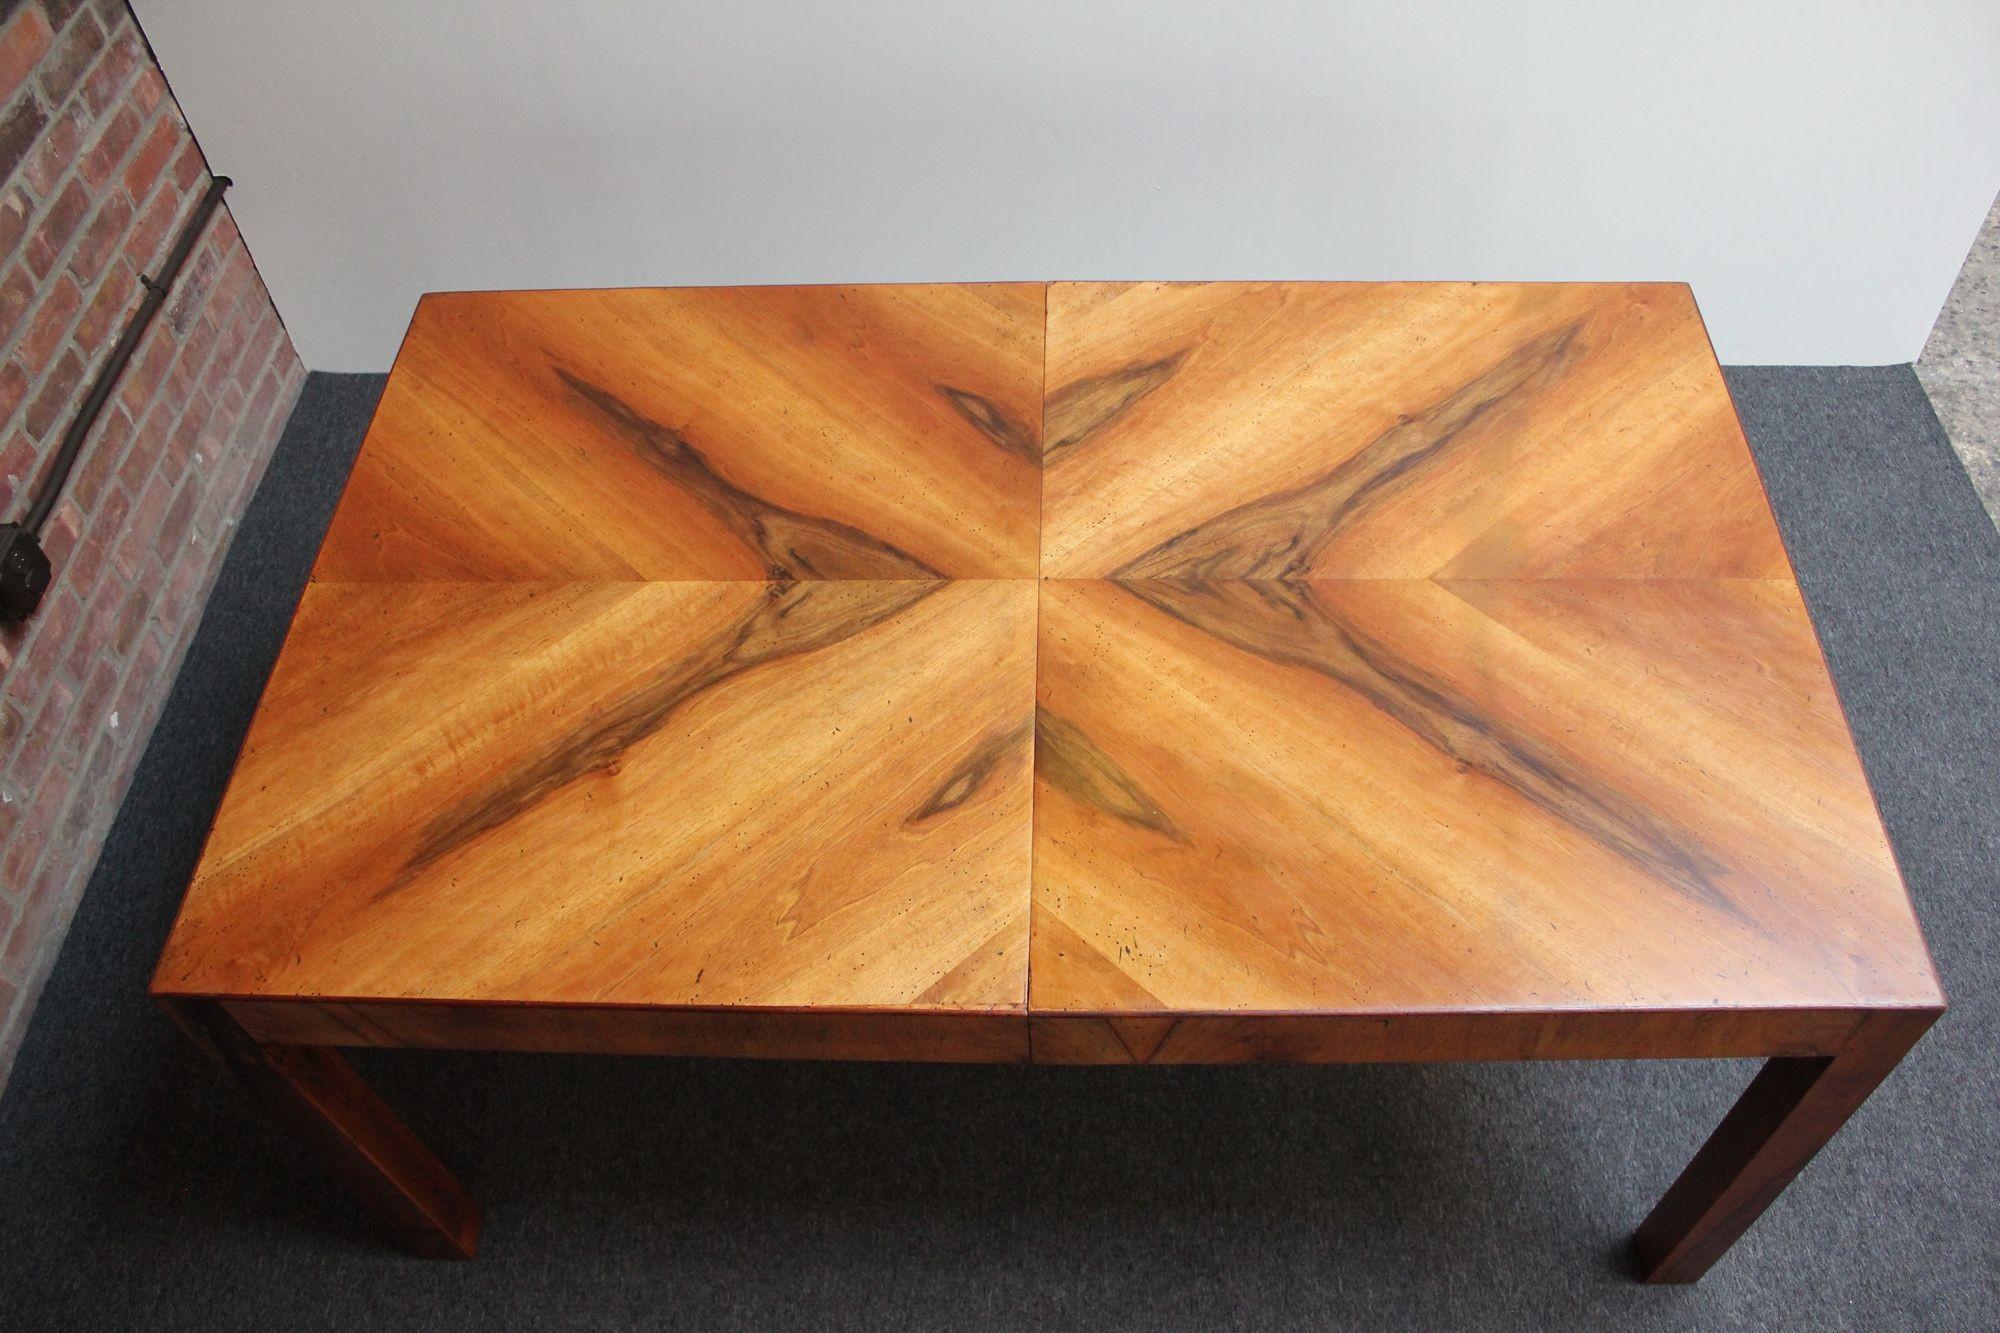 Visually striking Italian walnut Parsons-style extendable dining table with two leaves (ca. 1970, Italy).
Spectacular wood grain forming a a chevron pattern on both ends of the table.
Two additional leaves have a contrasting veneer with the grain